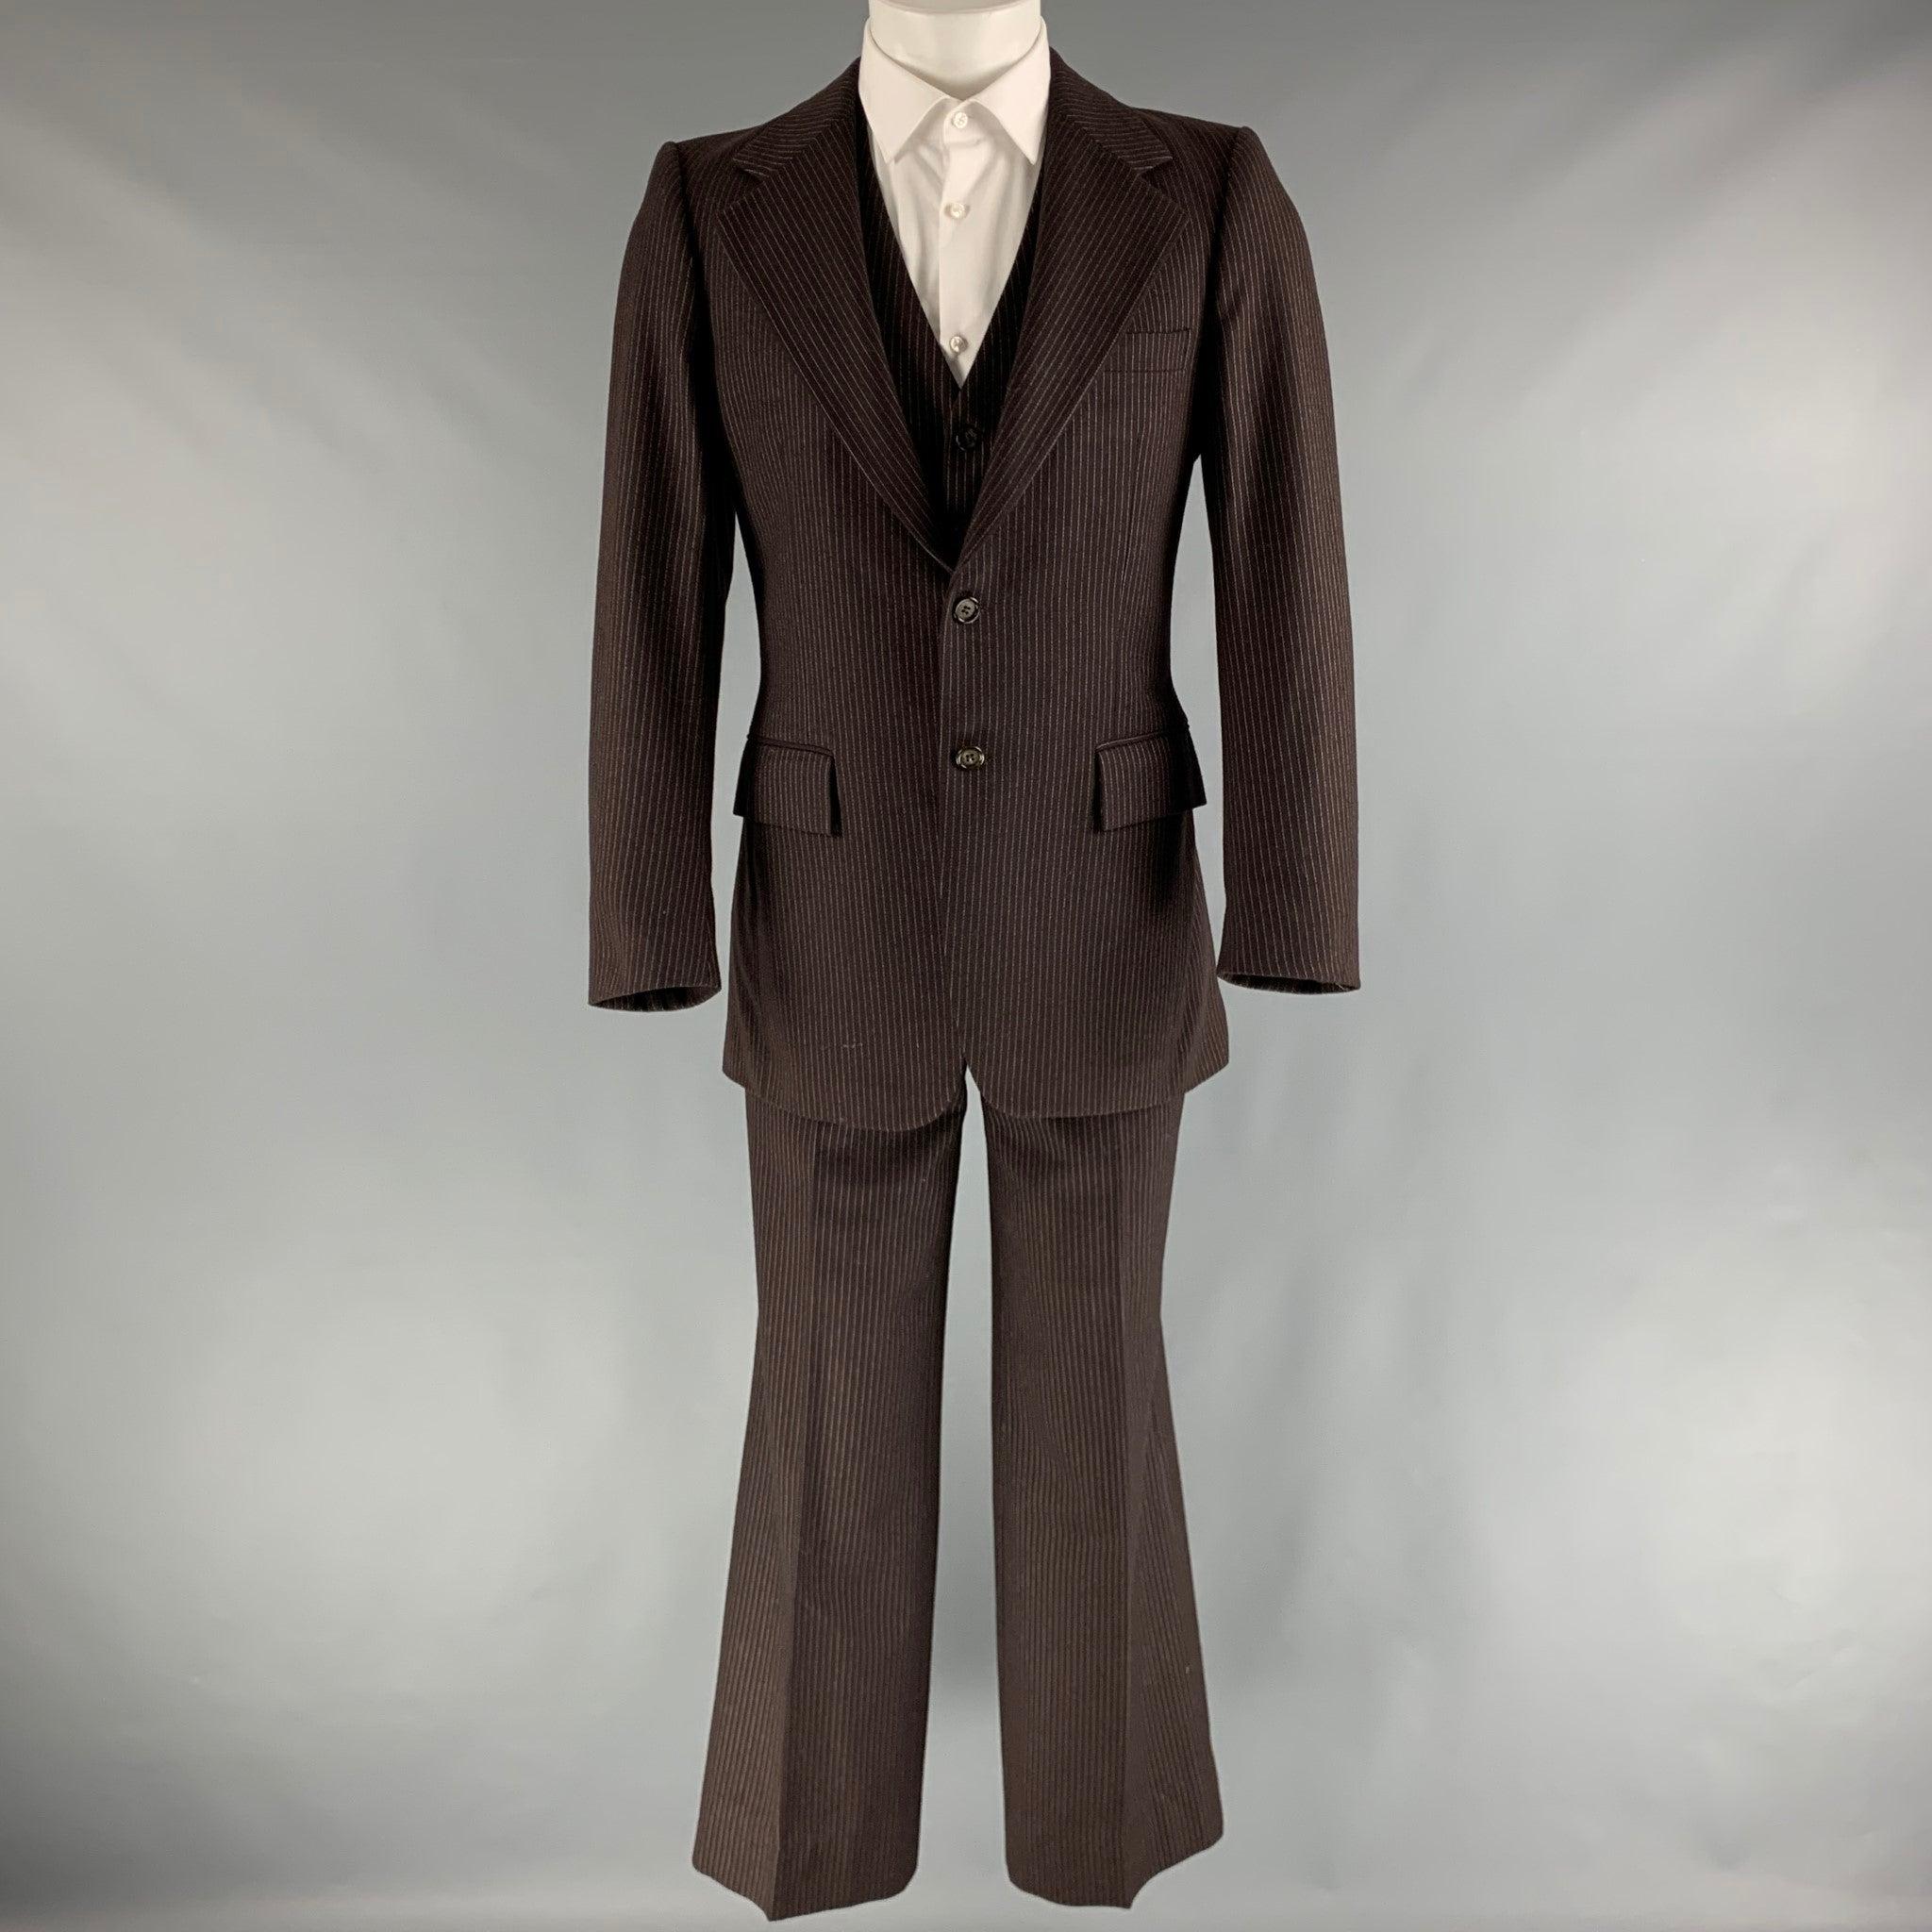 YVES SAINT LAURENT 3 Piece suit comes in brown and white pinstriped woven material with a full liner and includes a single breasted, double button sport coat with a notch lapel and a matching vest and flat front trousers. Made in France.Very Good